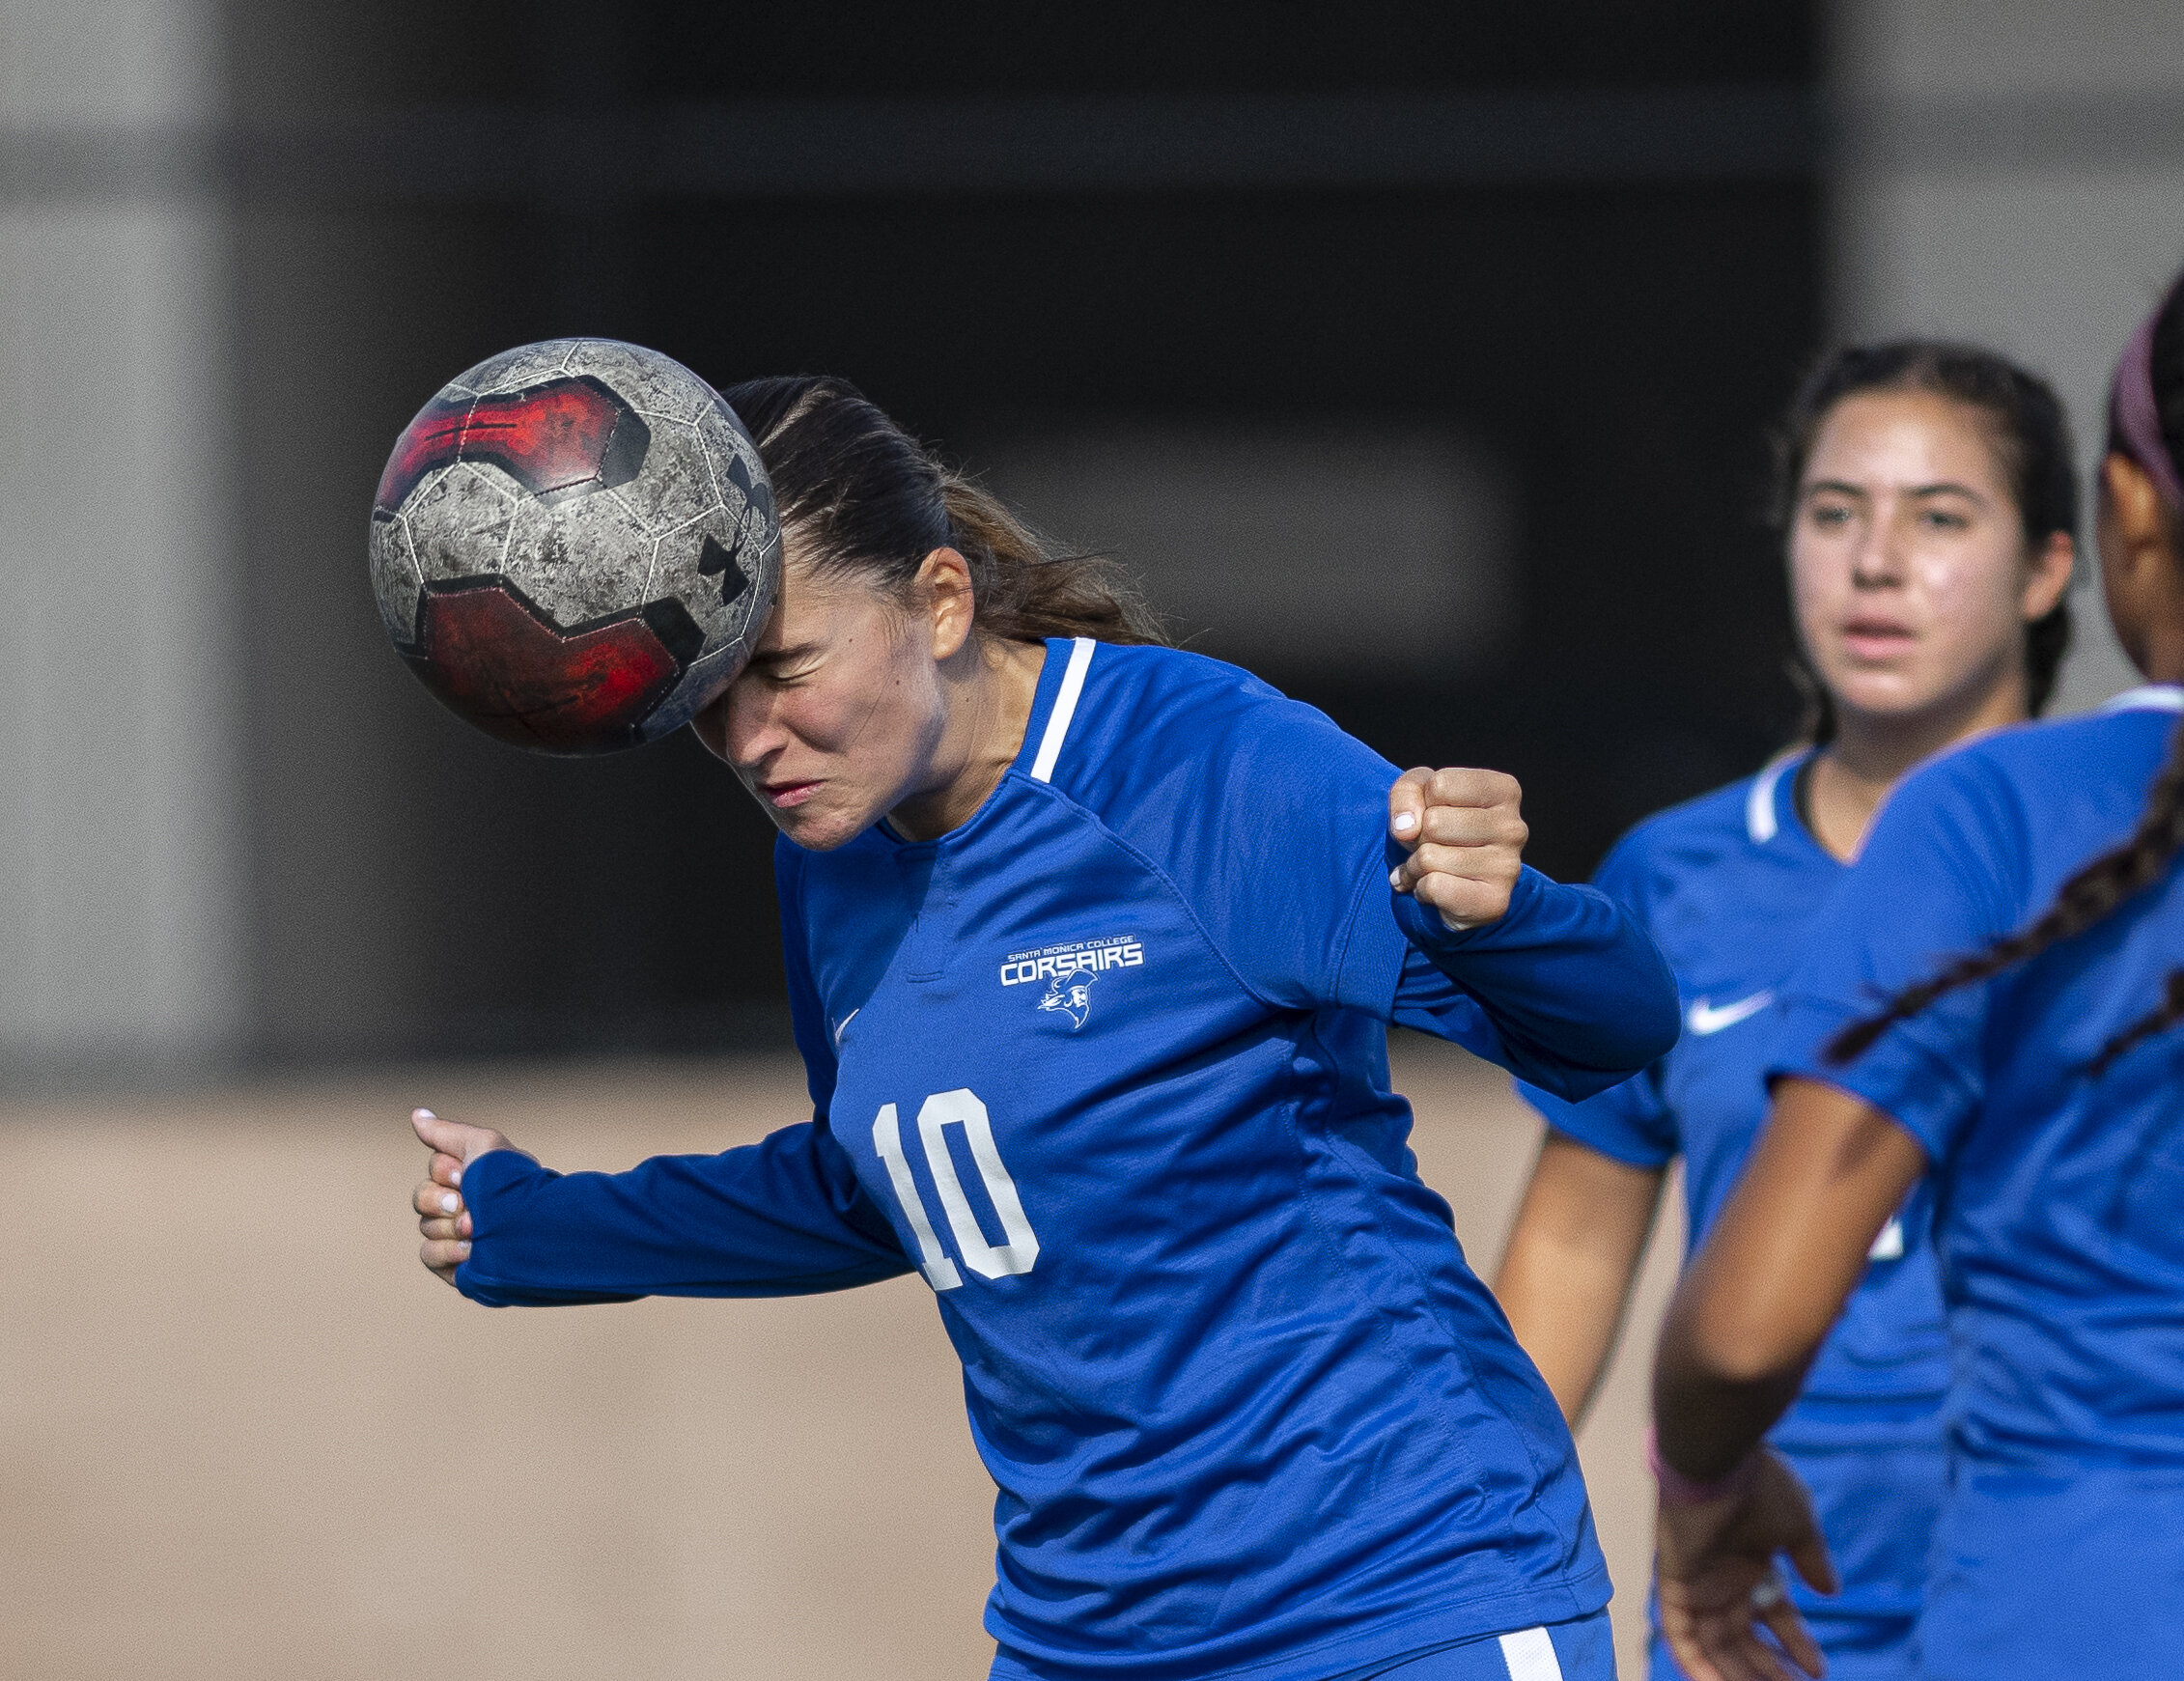  Santa Monica College Corsairs Woman's soccer player heads the ball into the goal during warmups just before the game begins with Citrus College. (Jon Putman | The Corsair) 